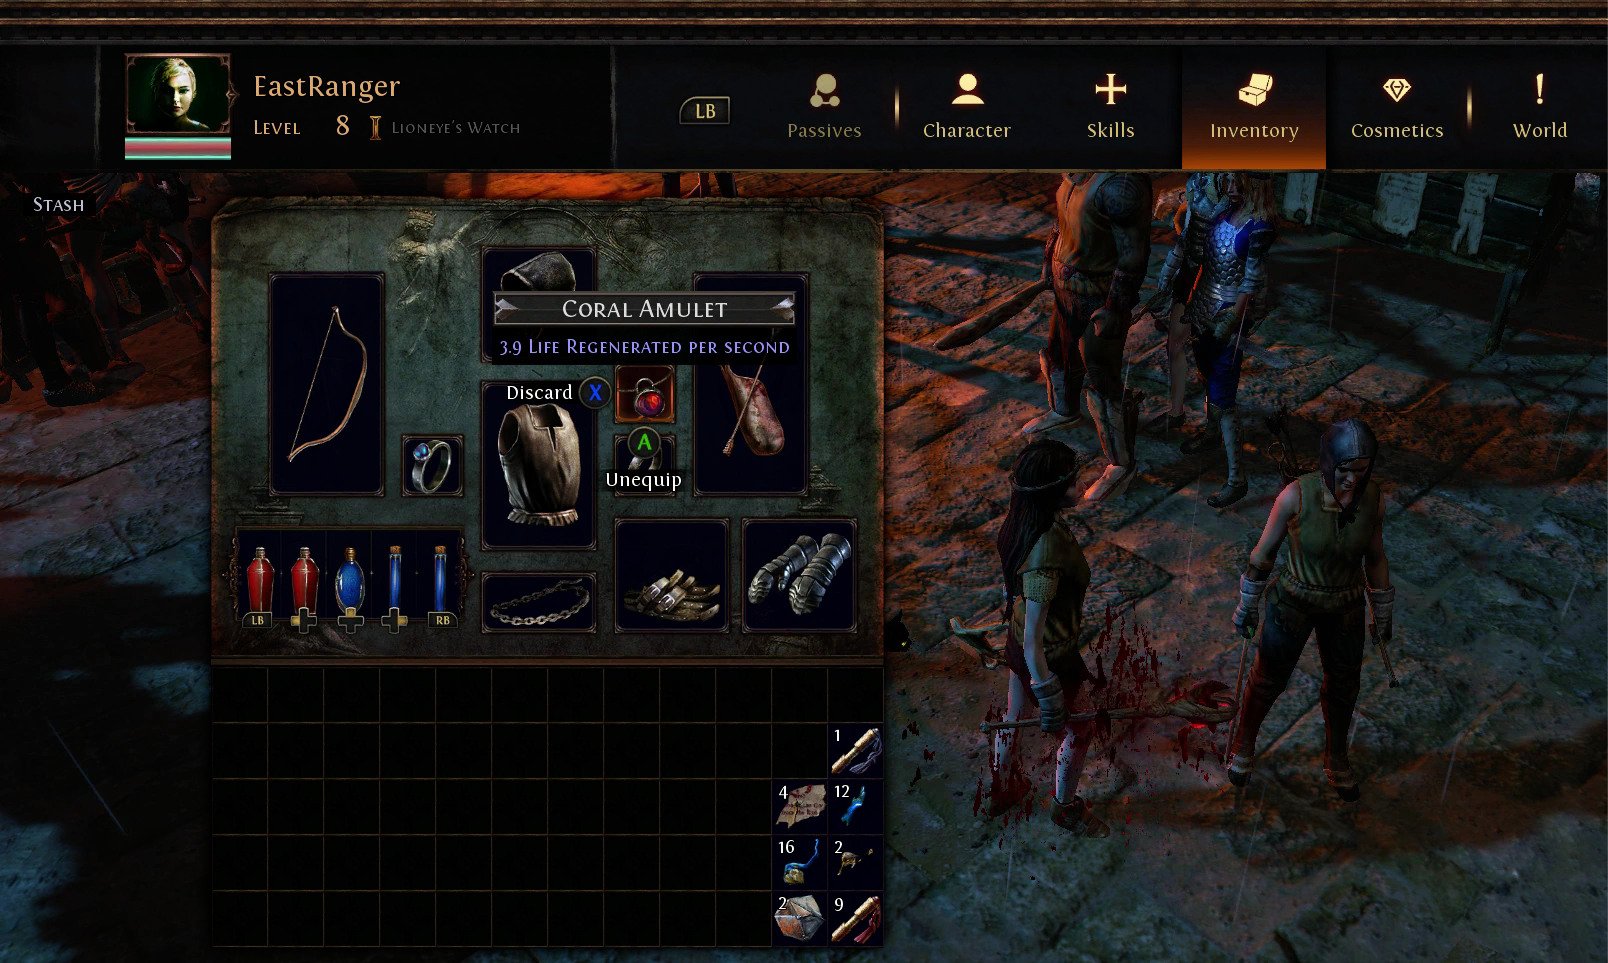 Path of Exile Beginners Guide